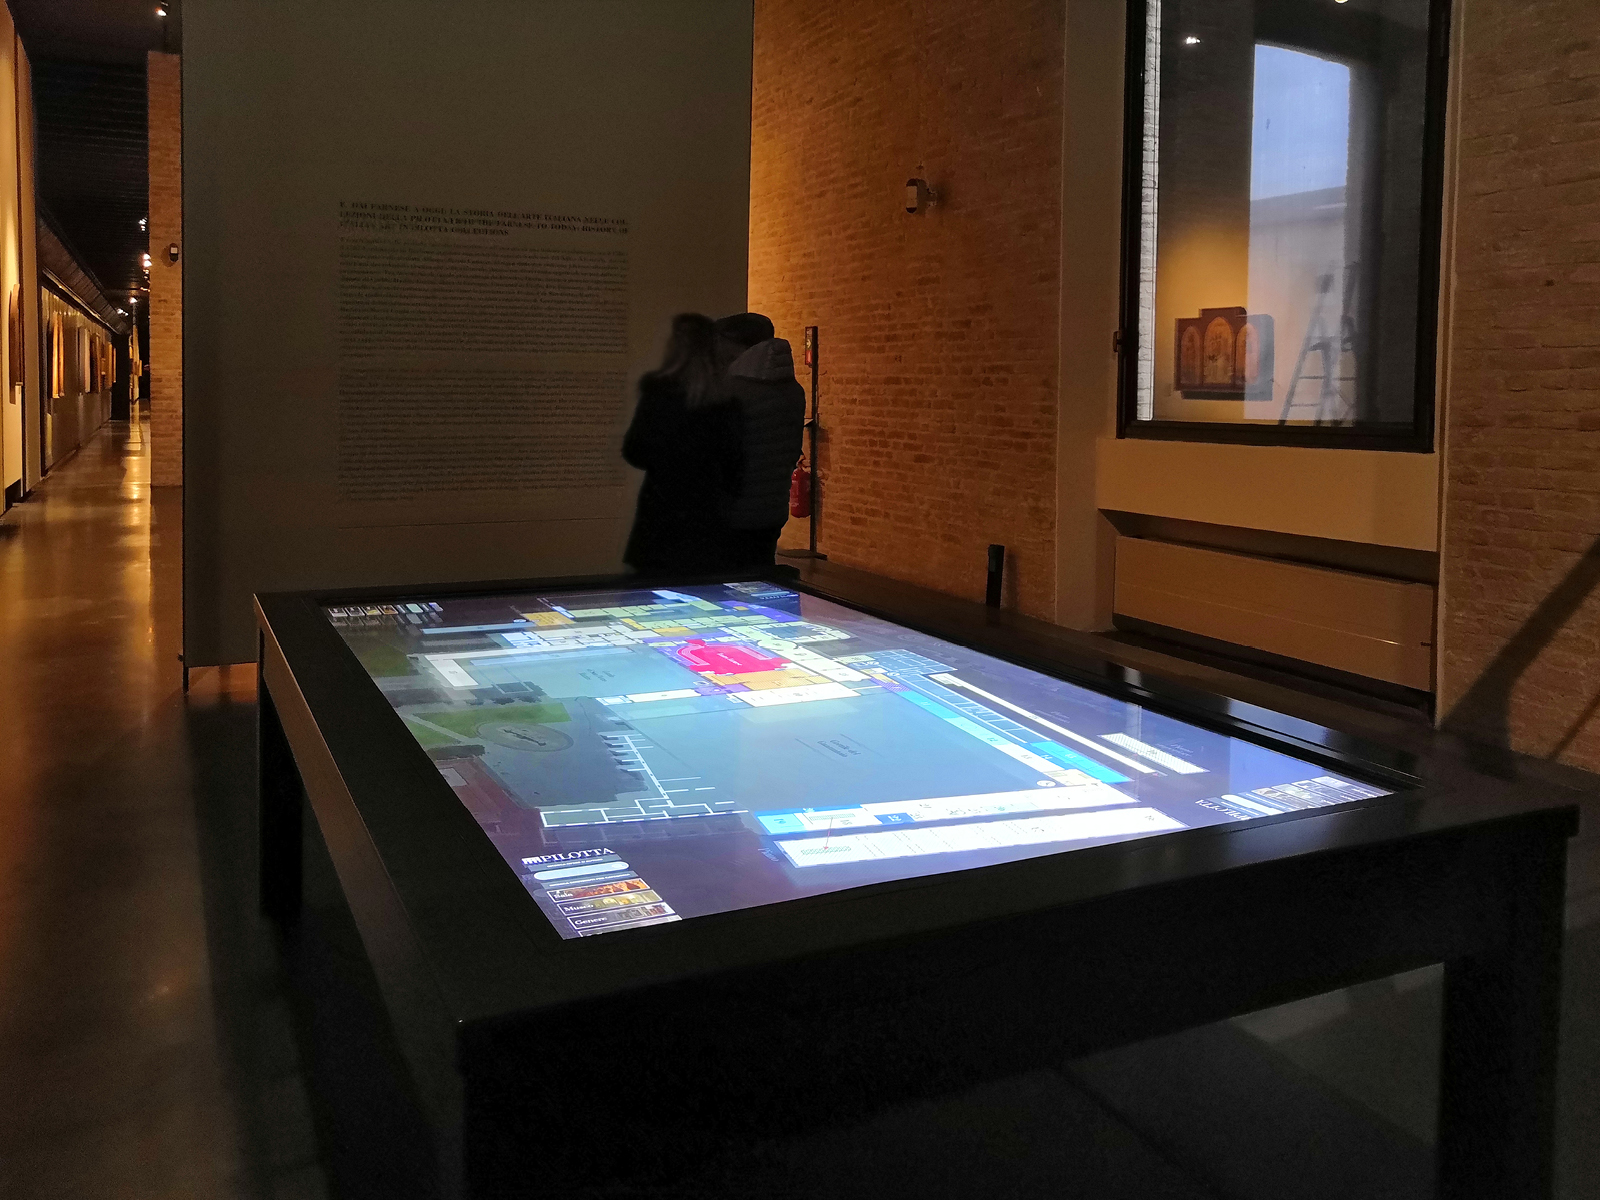 Touchwindow - A new dimension for art